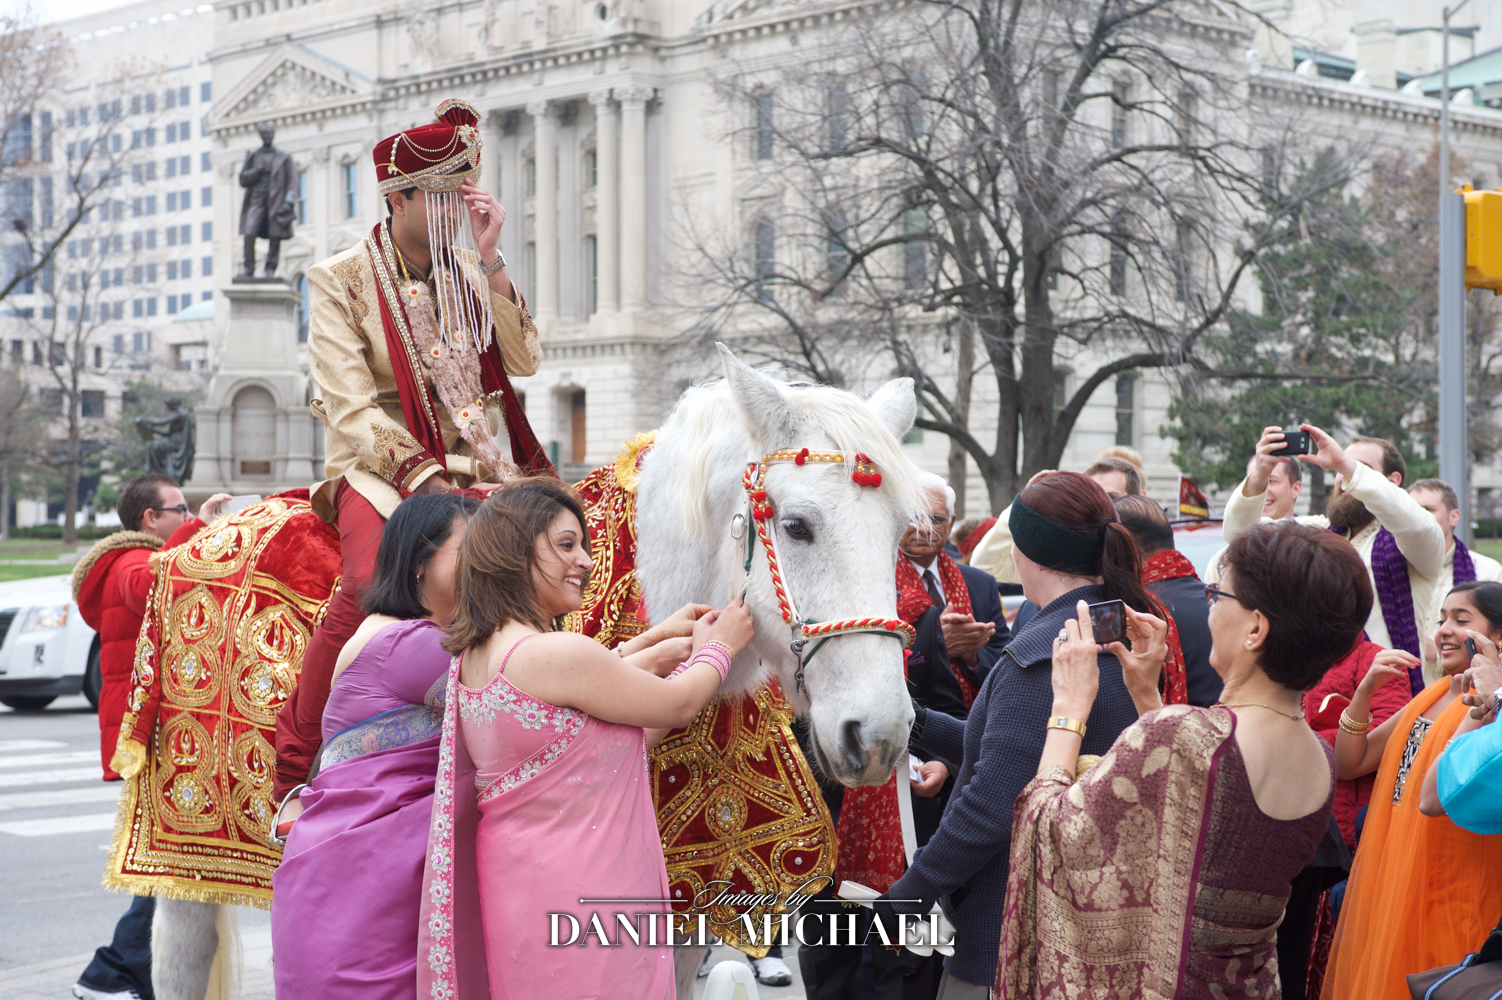 Indian groom in traditional attire riding a white horse during baraat ceremony